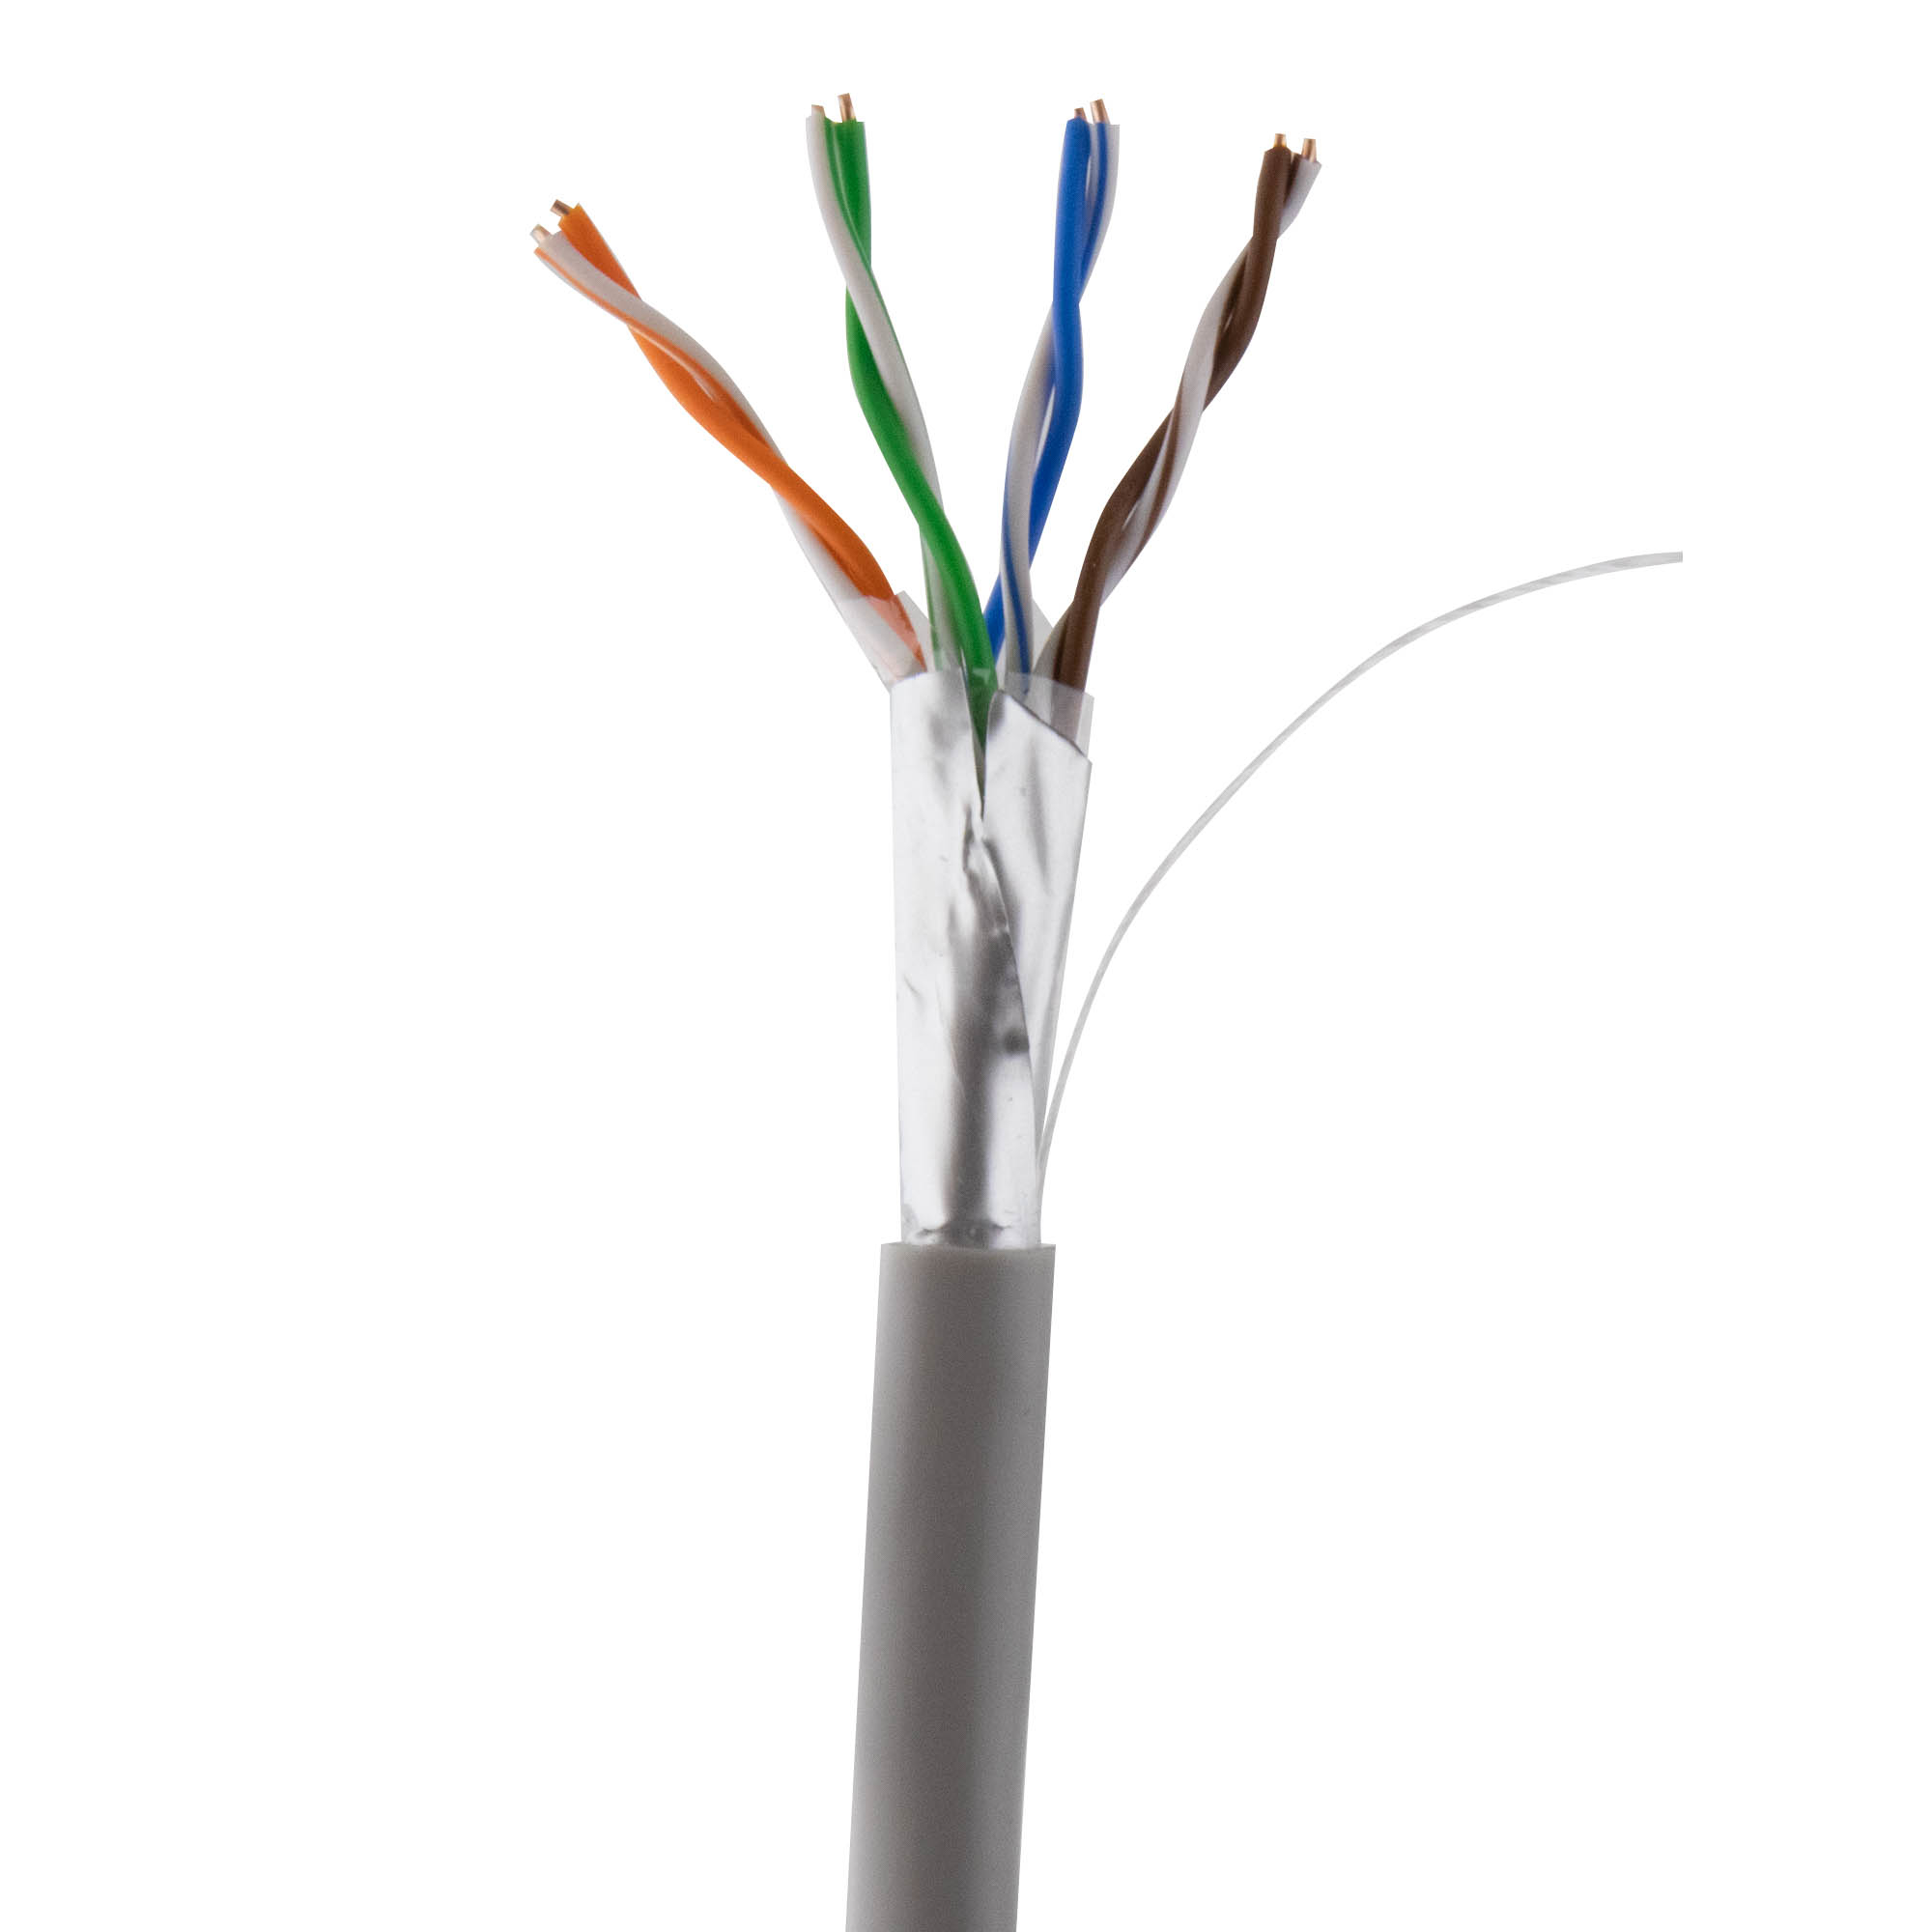 Network cable for installation Cat. 5e, 50m